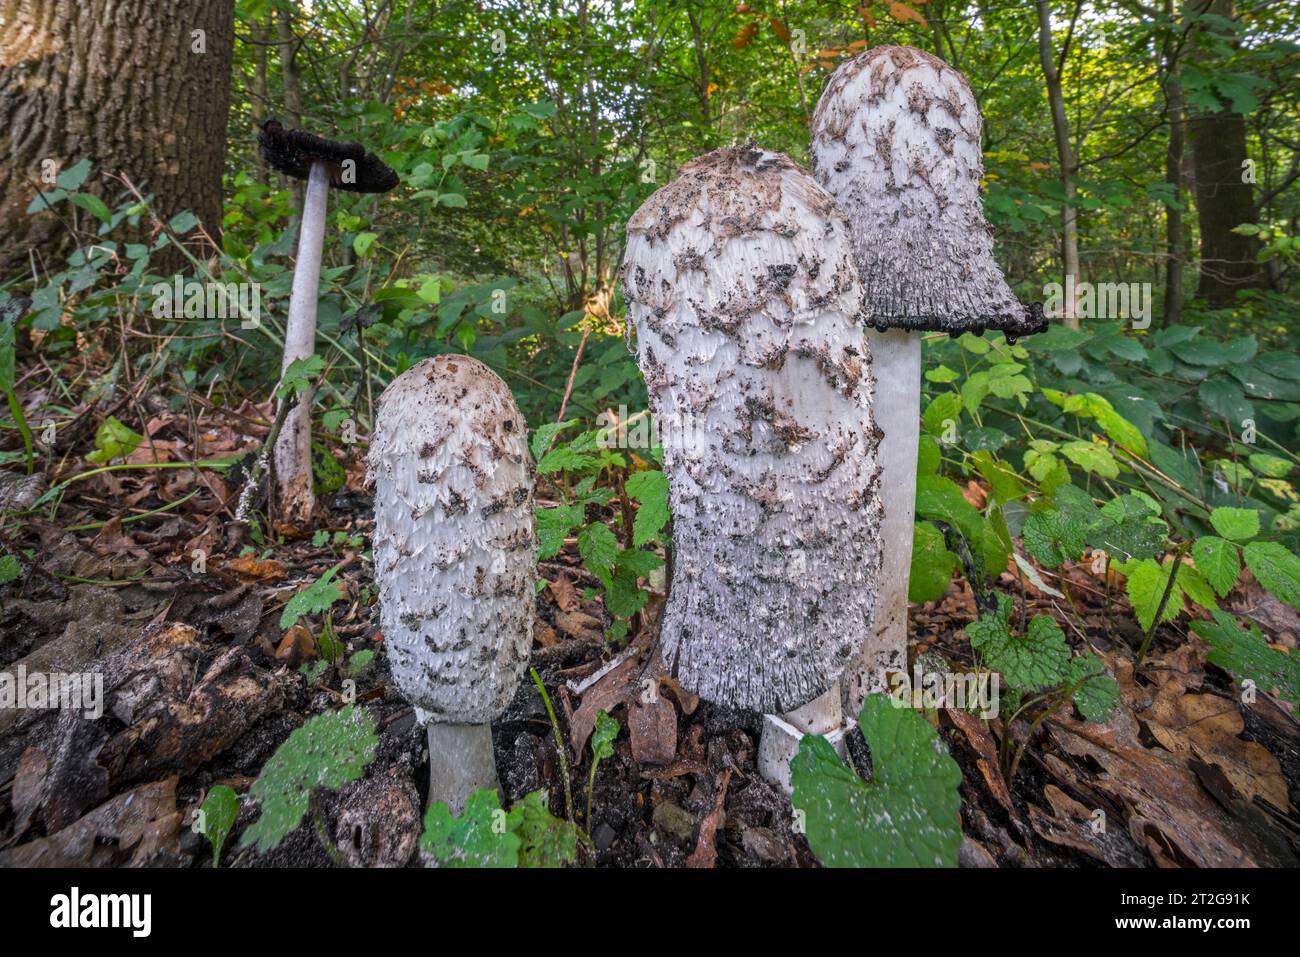 Shaggy ink cap / lawyer's wig / shaggy mane (Coprinus comatus) showing different growth stages in forest in autumn / fall Stock Photo